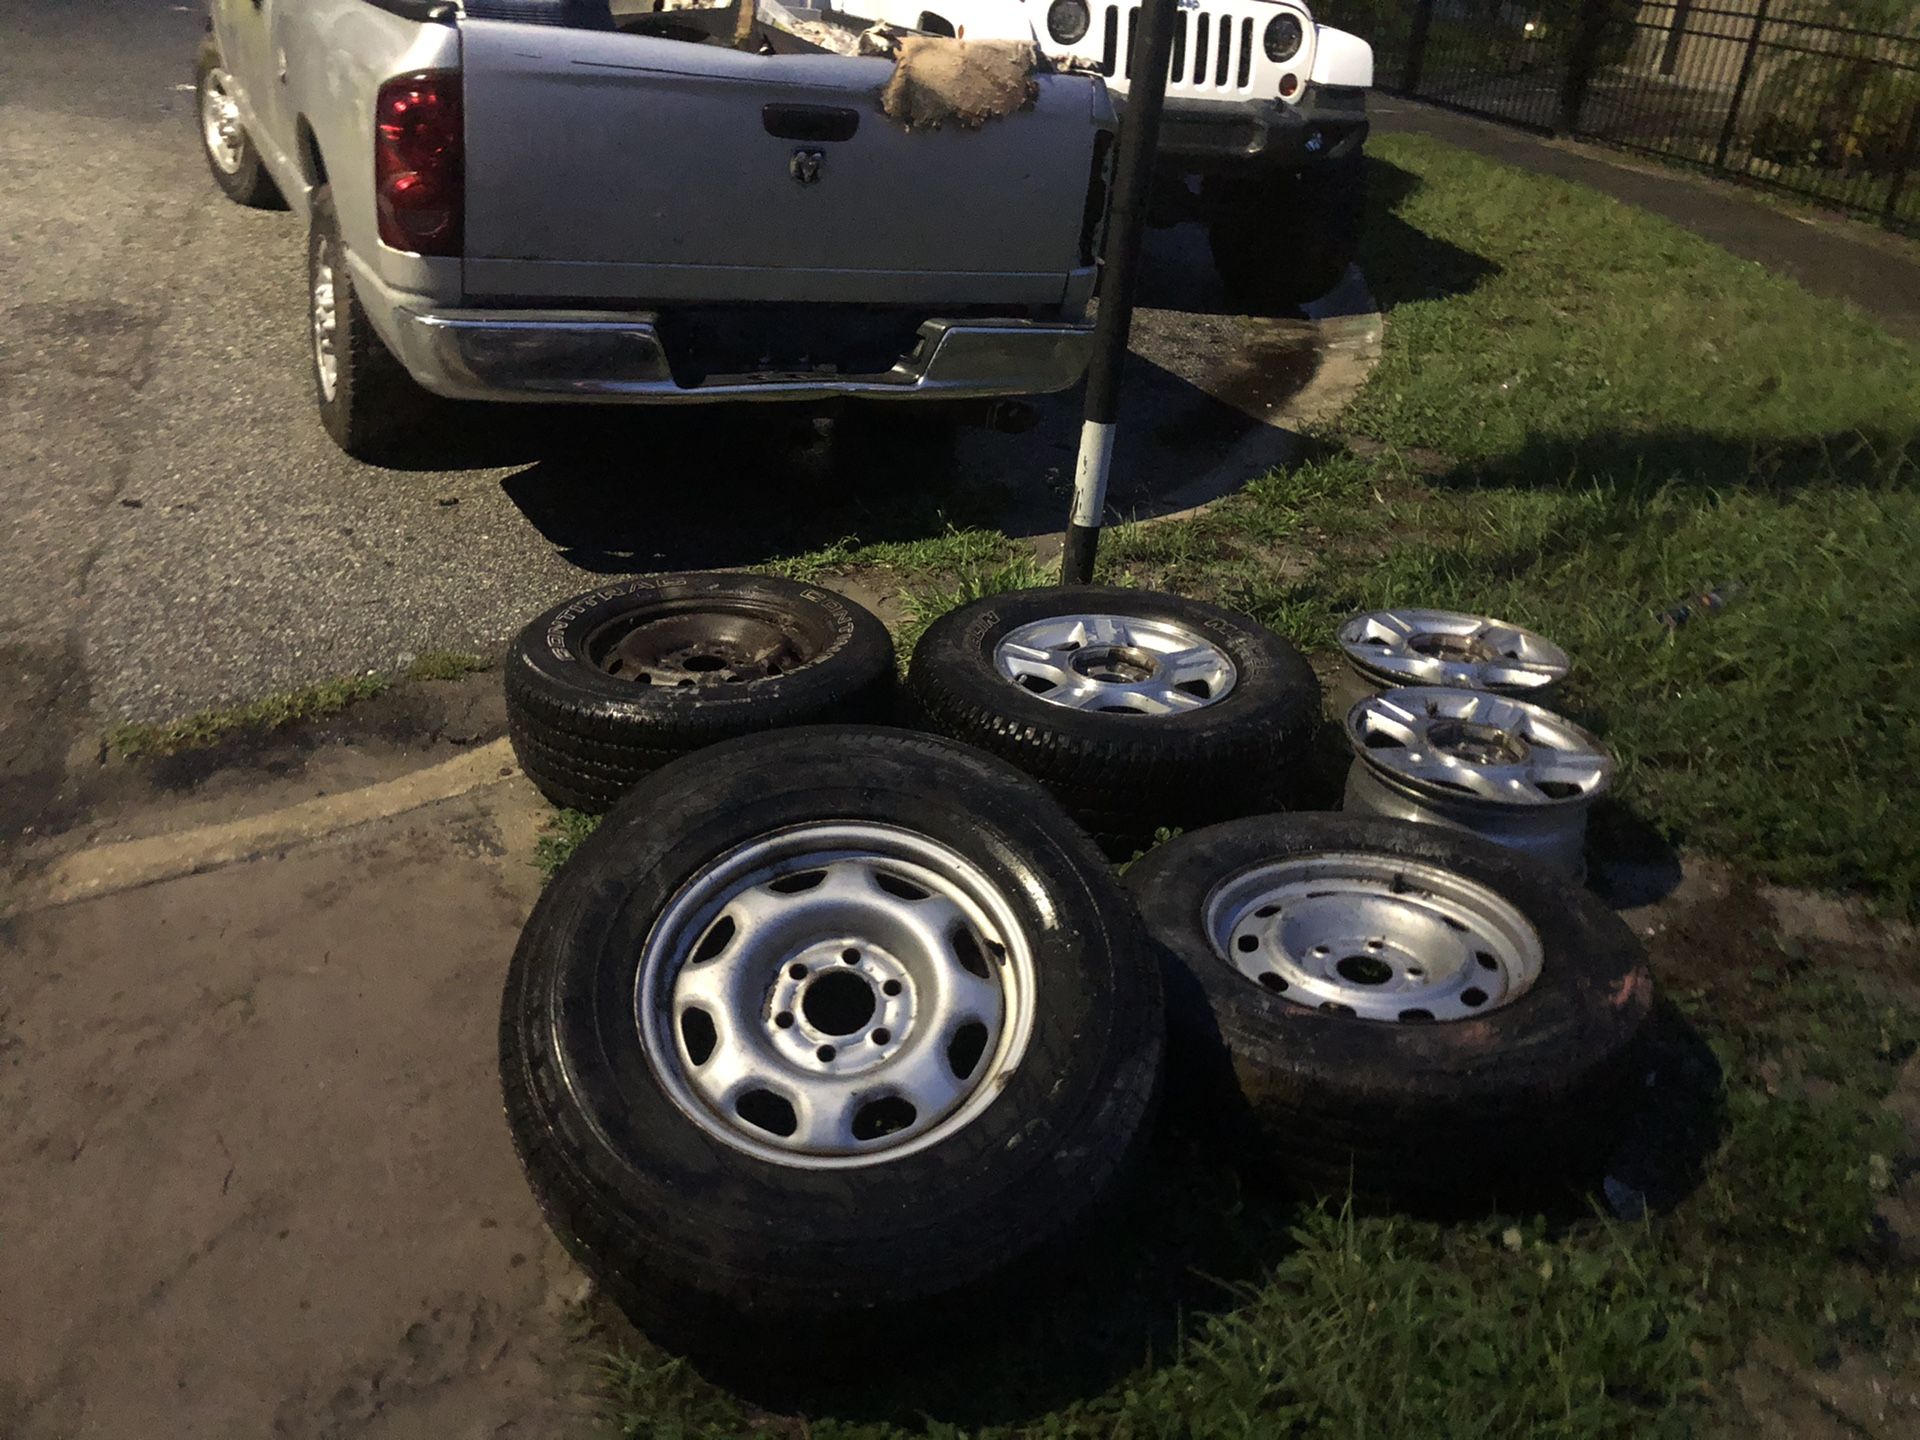 Rims and tires fit f150 2005 6 lugs free on the curb 2464 Lawanna Dr Orlando, FL 32807 United States